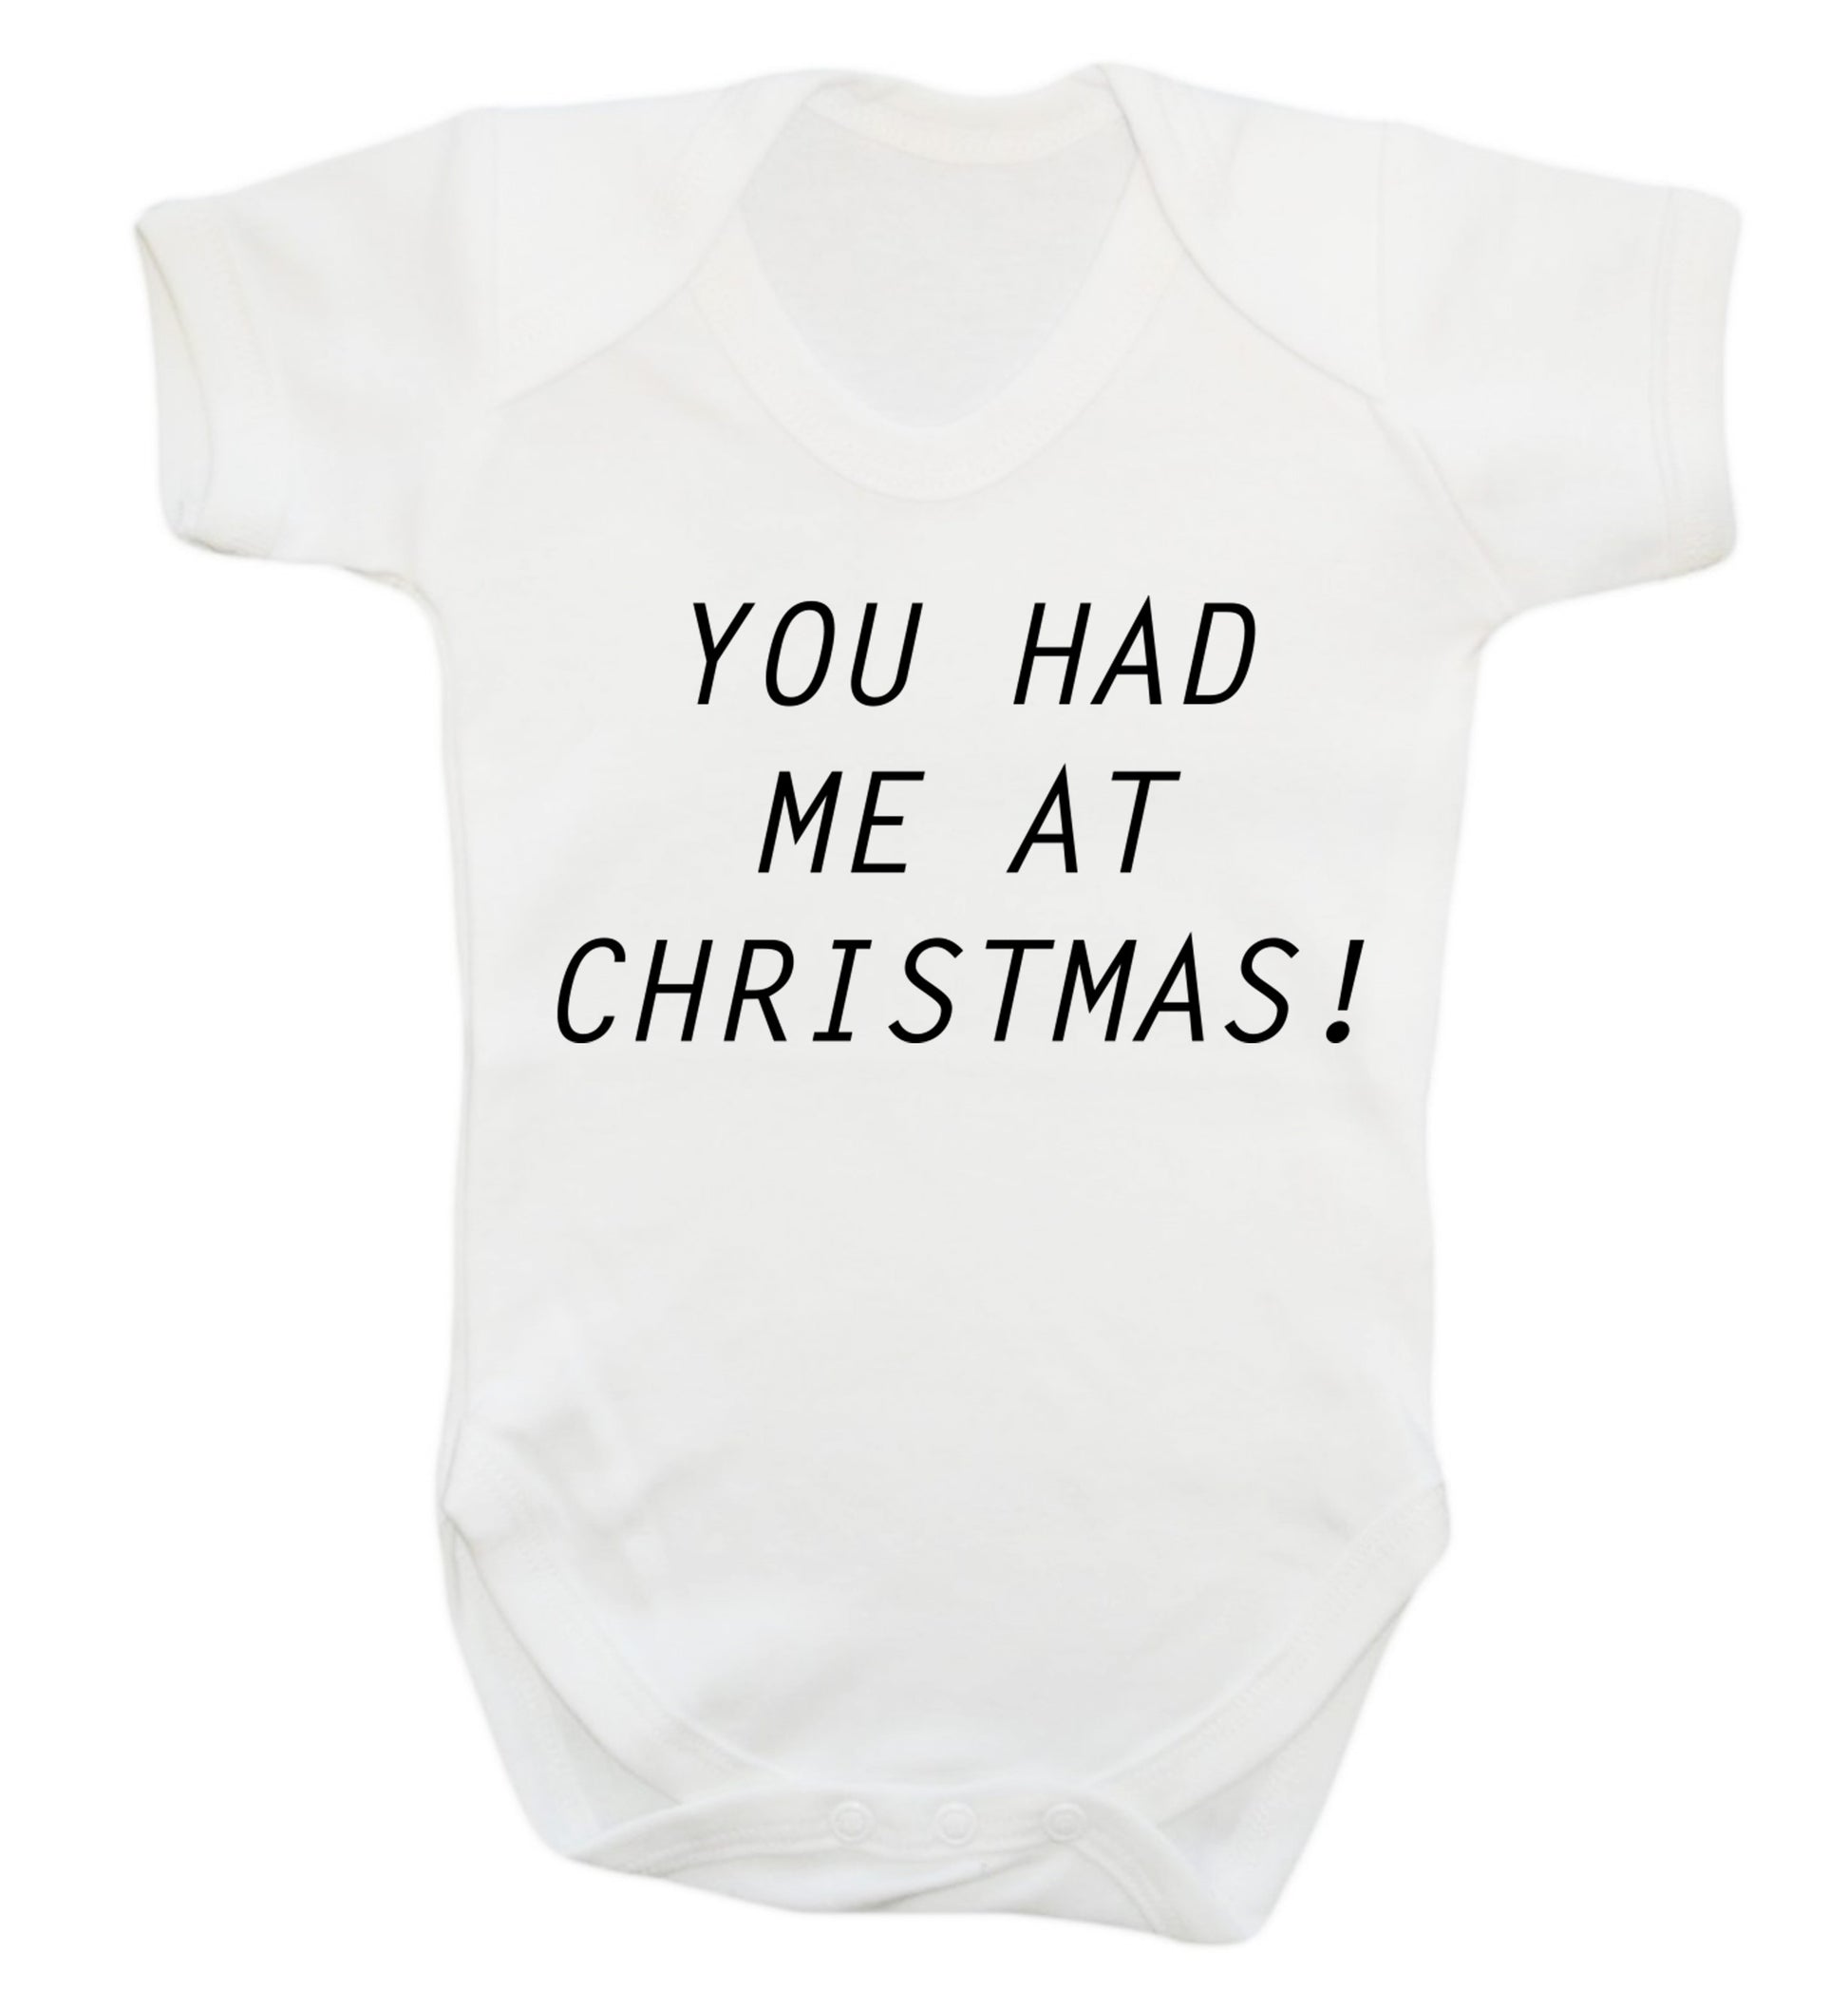 You had me at Christmas Baby Vest white 18-24 months